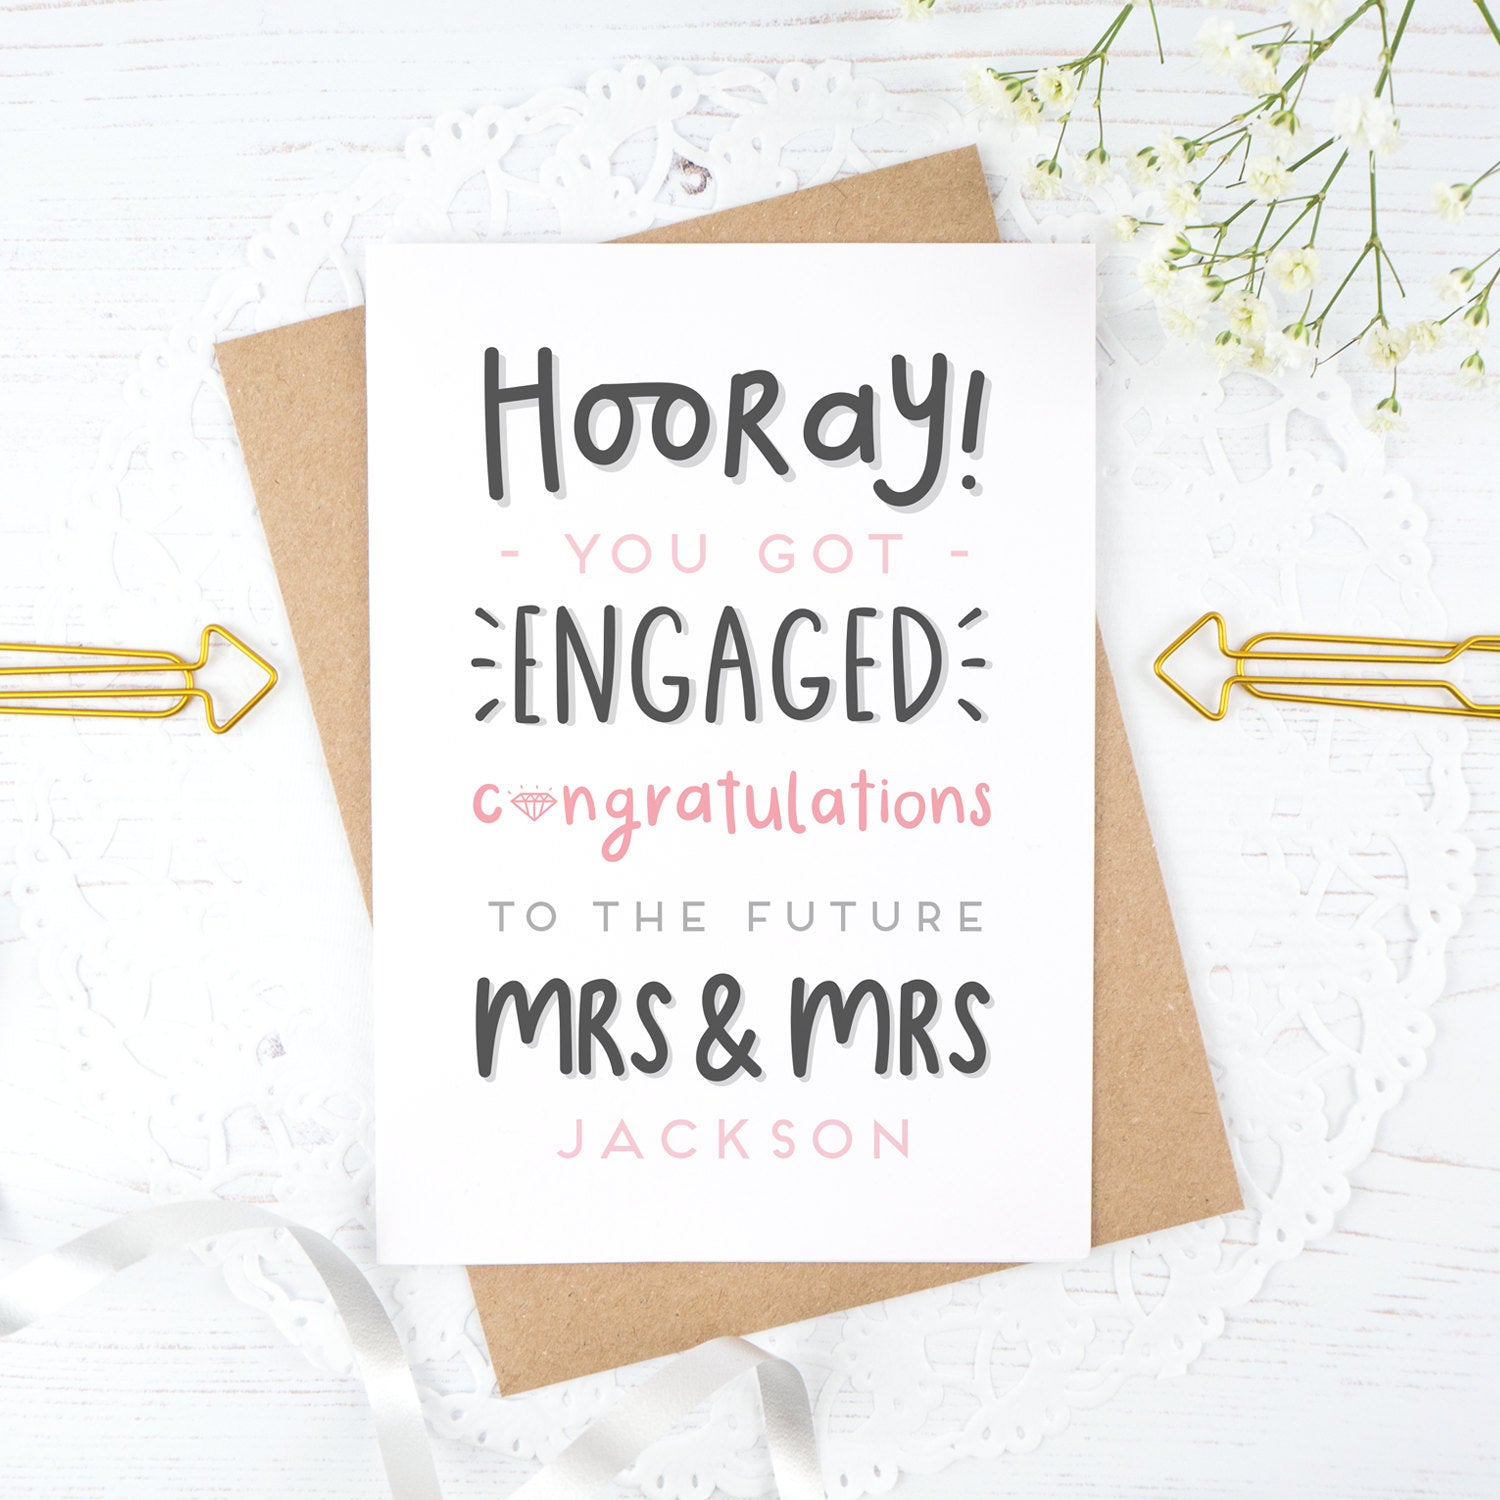 Hooray you got engaged! - Personalised Mrs & Mrs engagement card in pink